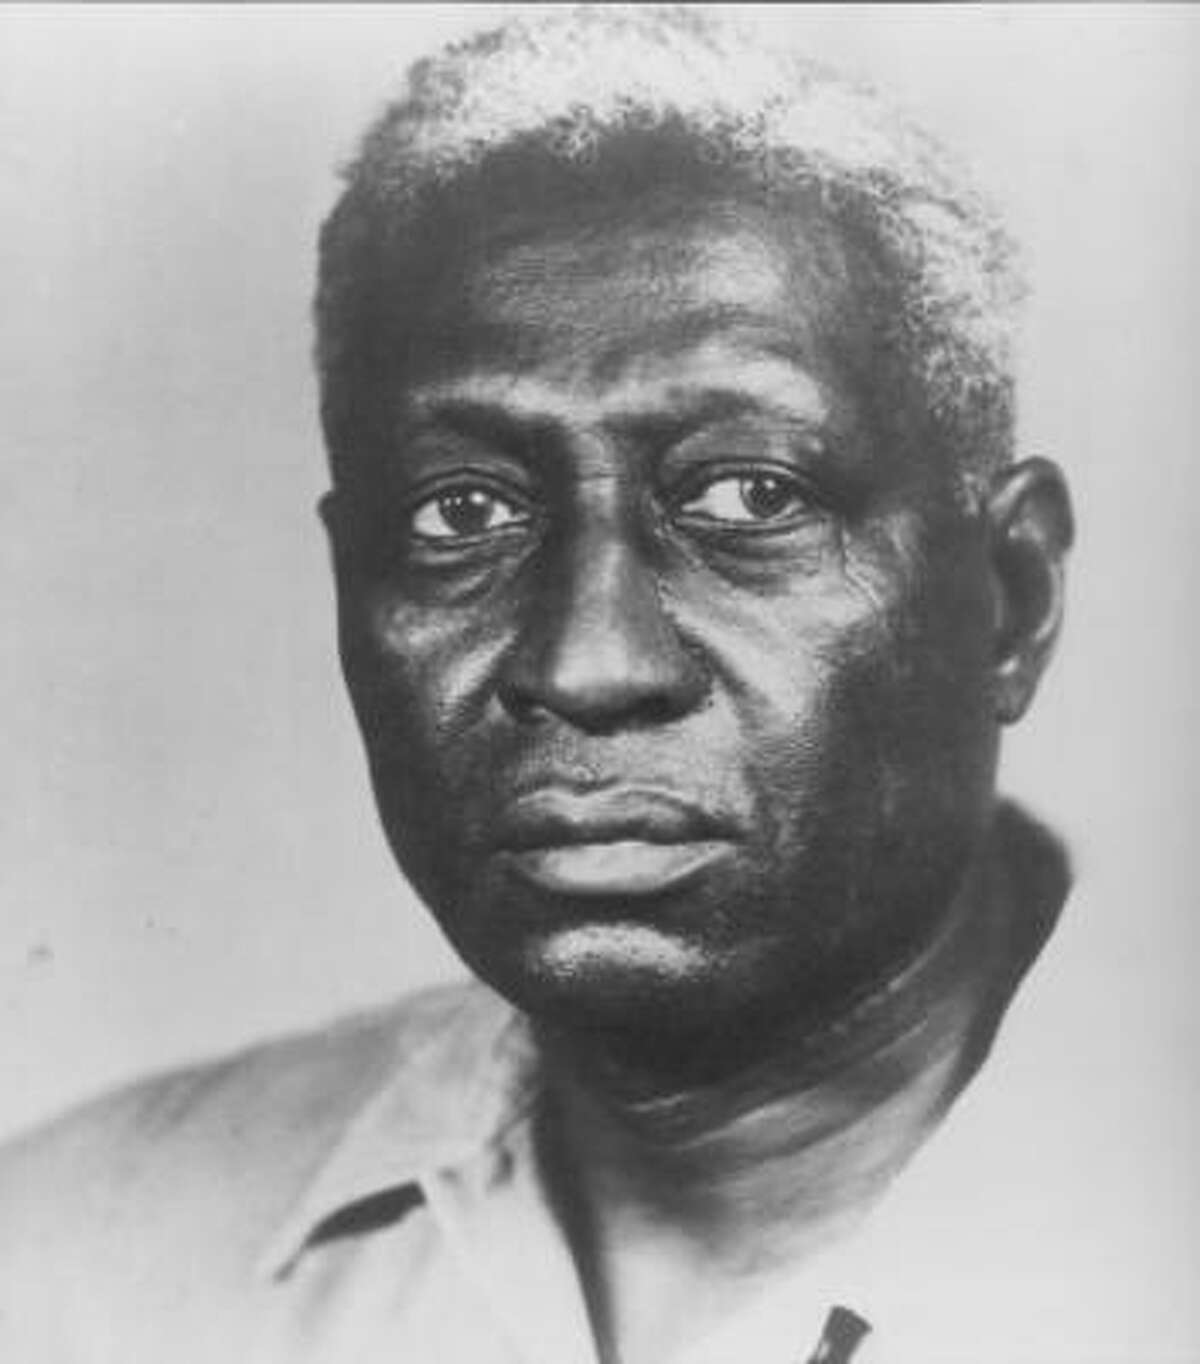 Among the most famous former residents of the Louisiana State Penitentiary -- often referred to as Angola -- was folk music legend Leadbelly. A small prison museum references his time there. 